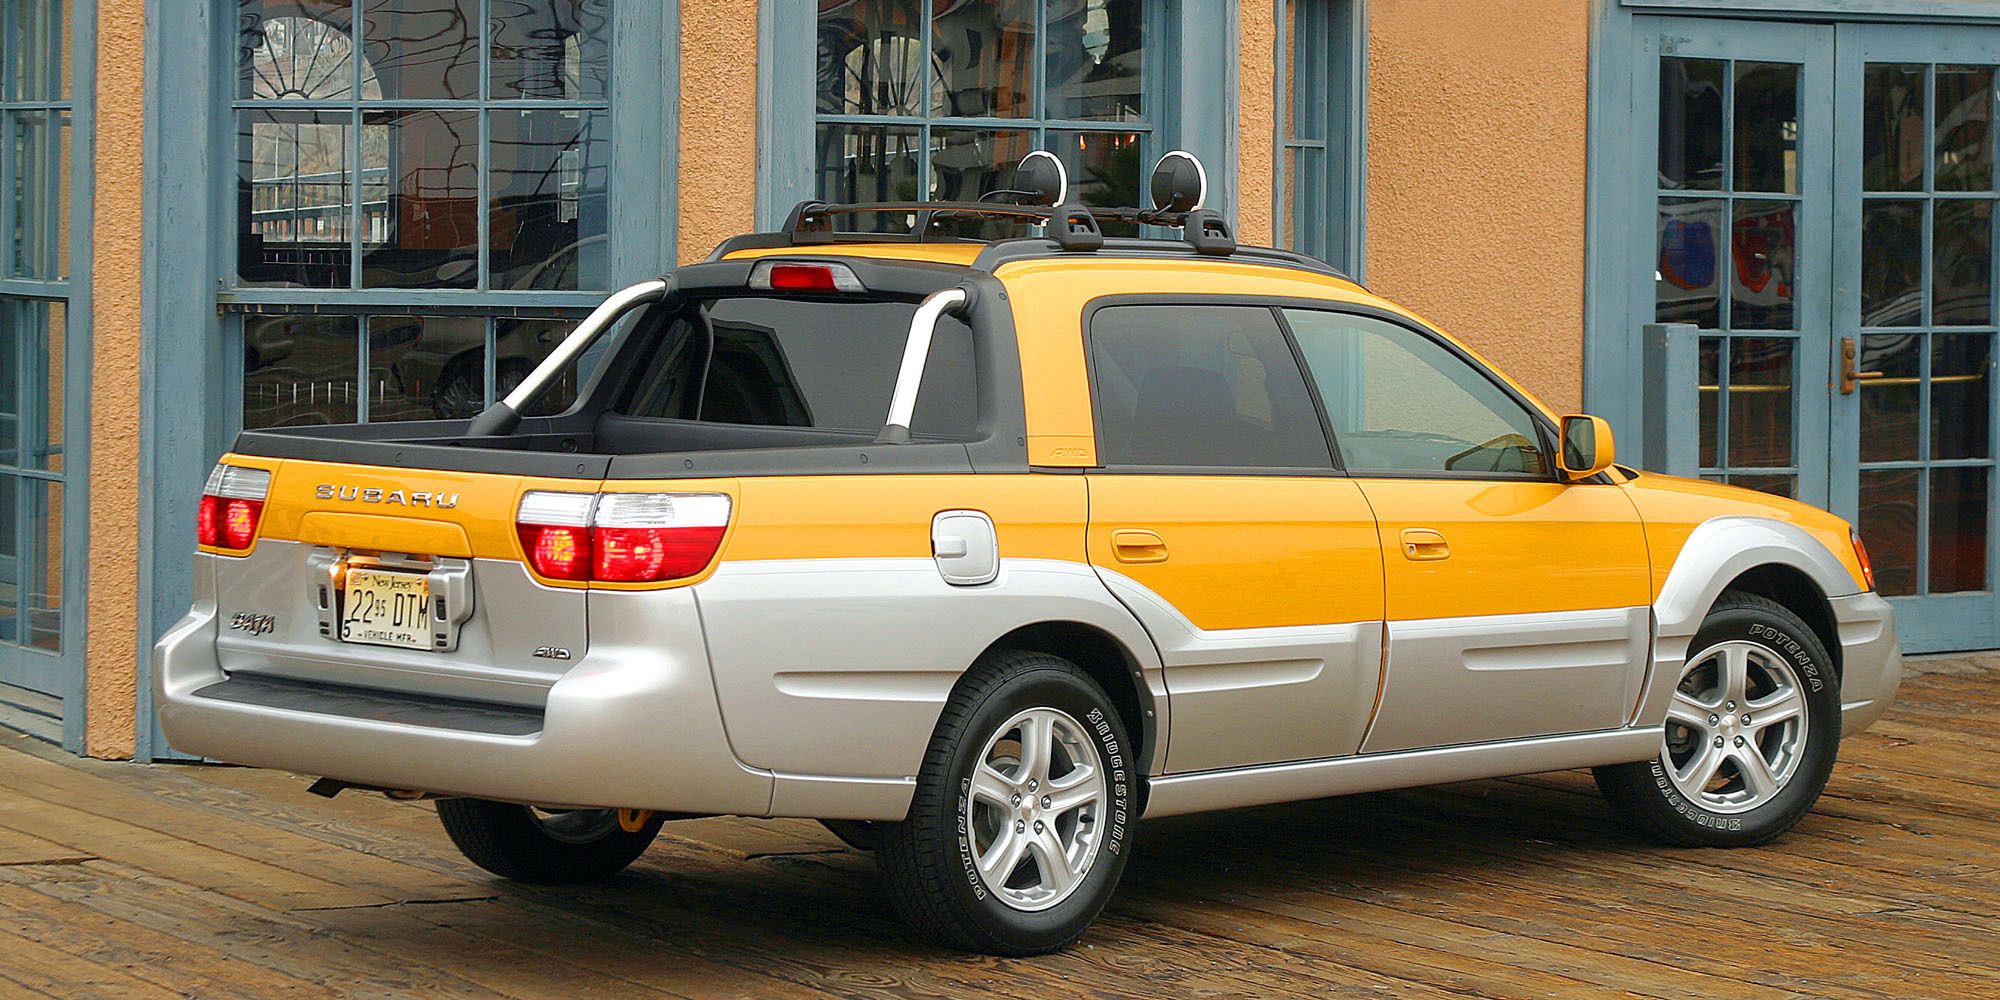 Rear 3/4 view of the Baja